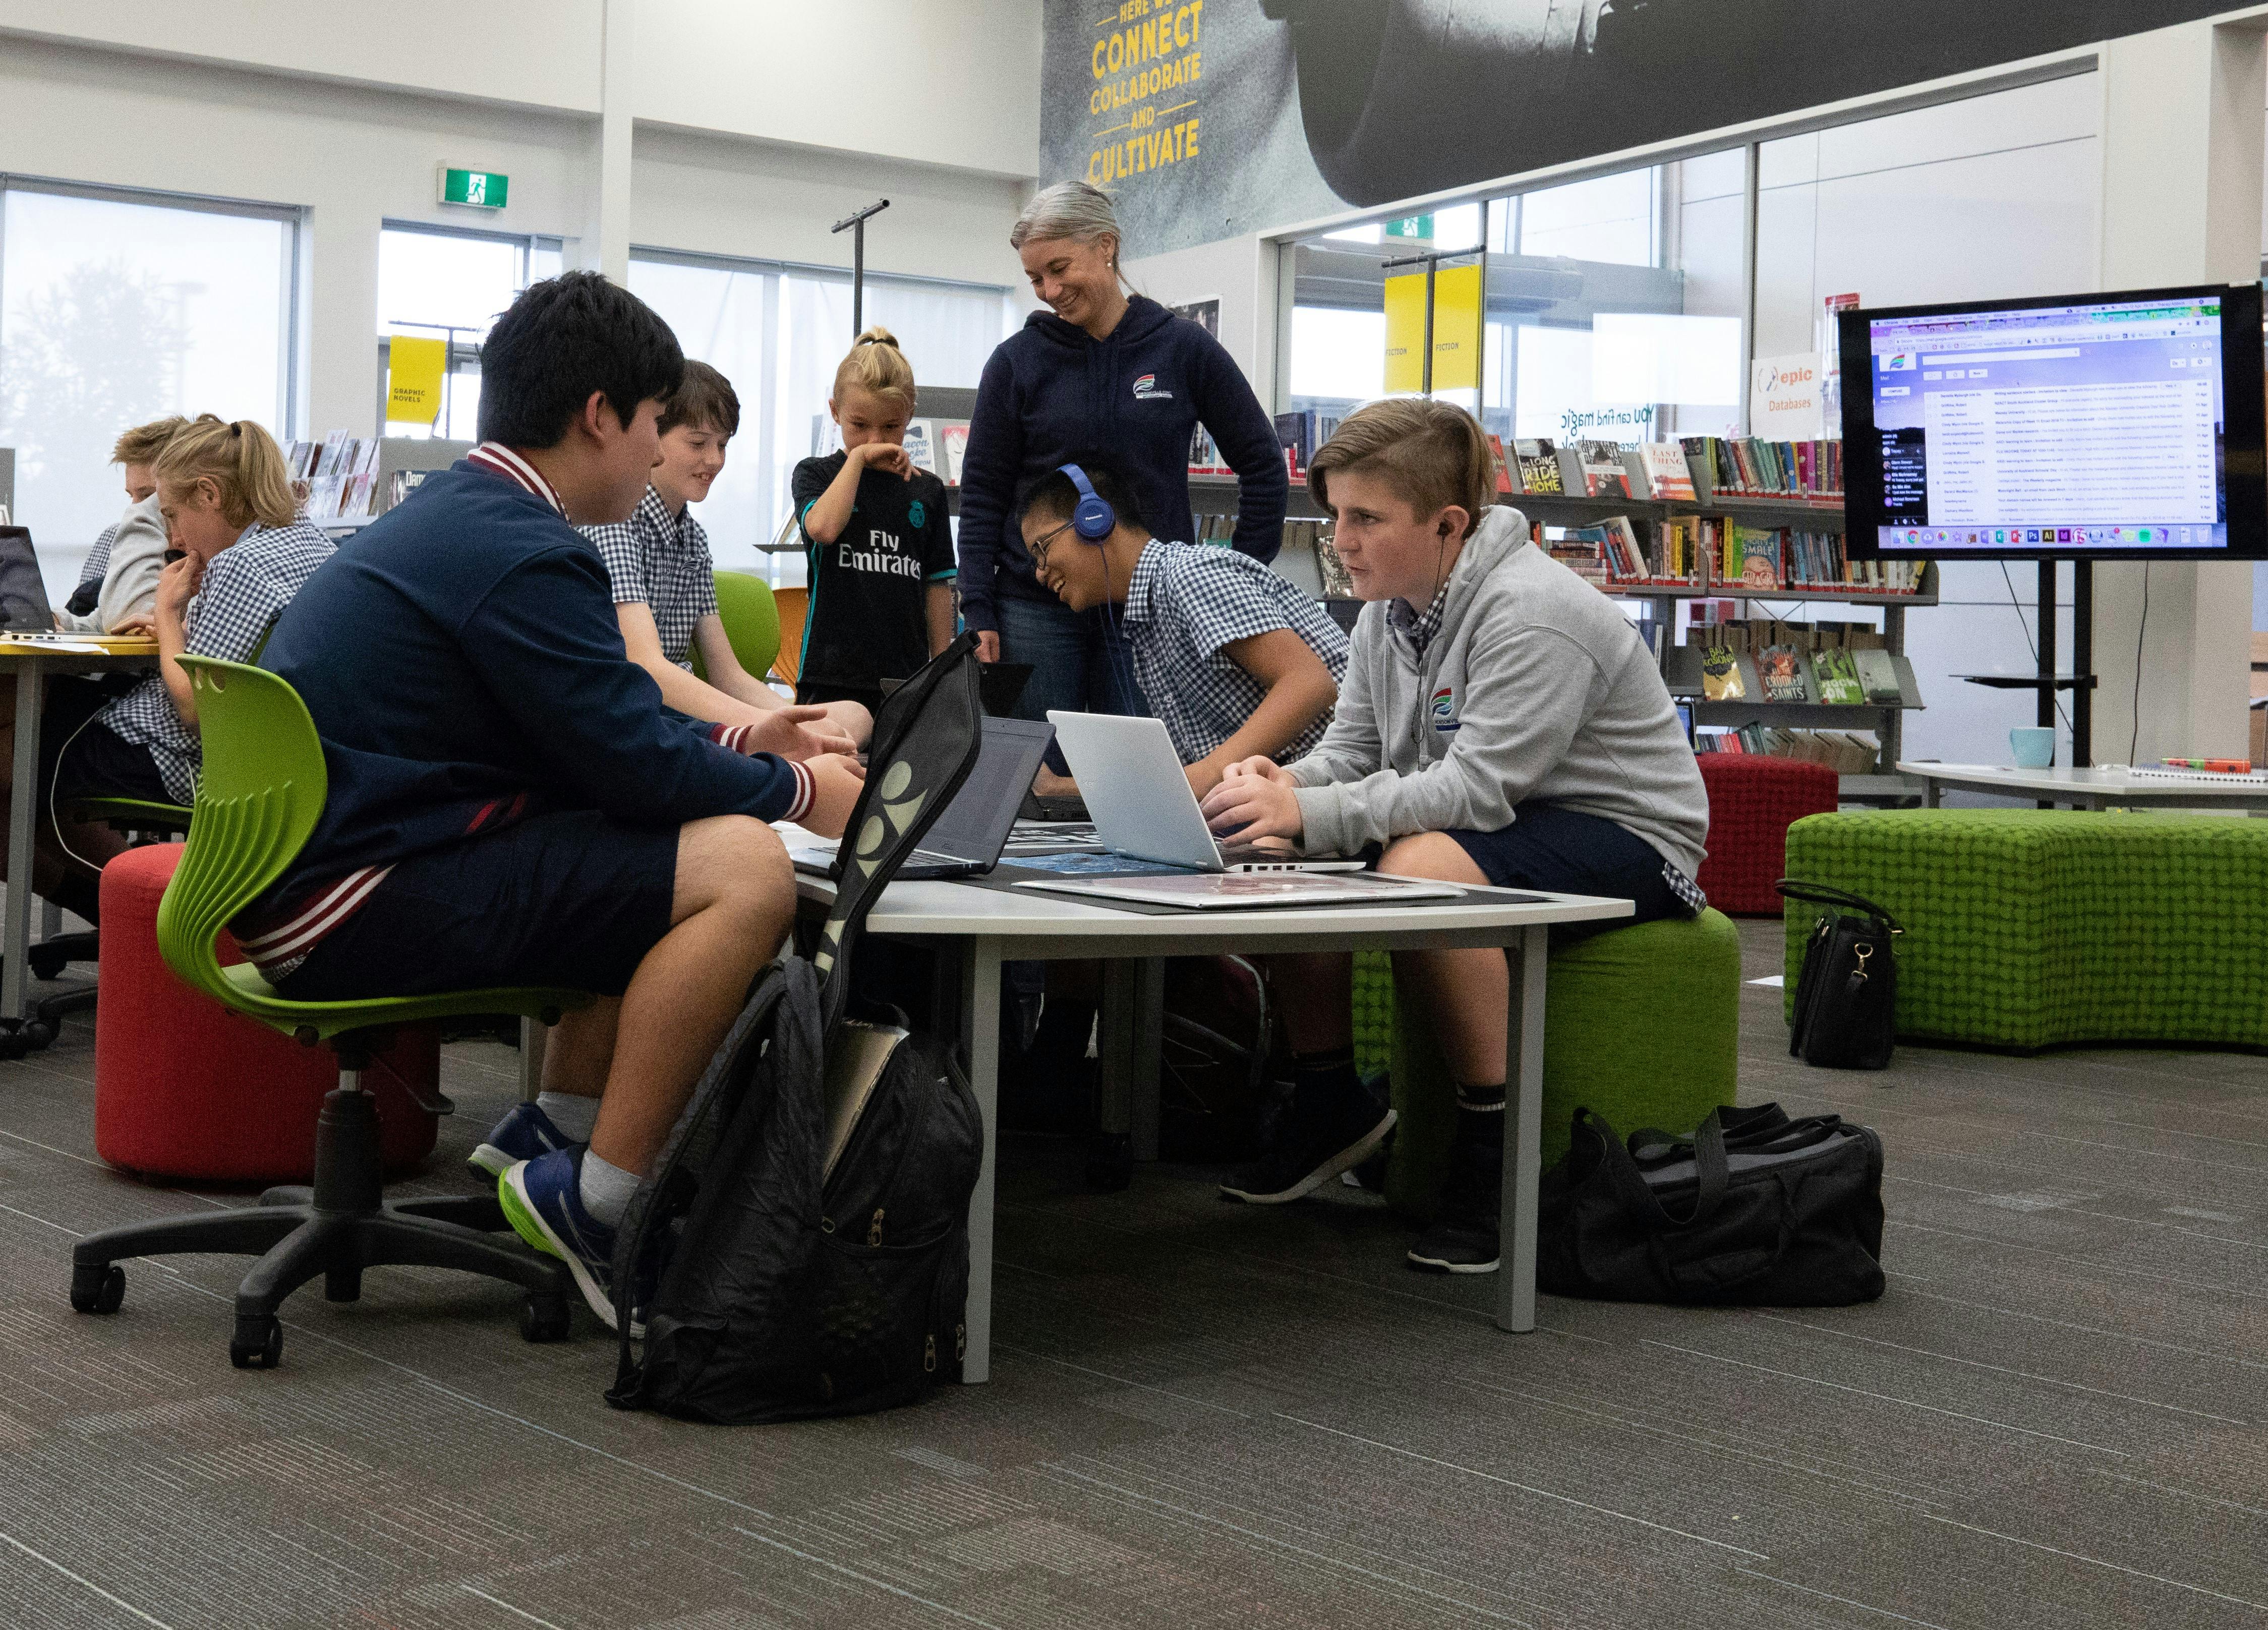 A teacher and her students working collaboratively on their devices at Hobsonville Point Secondary School